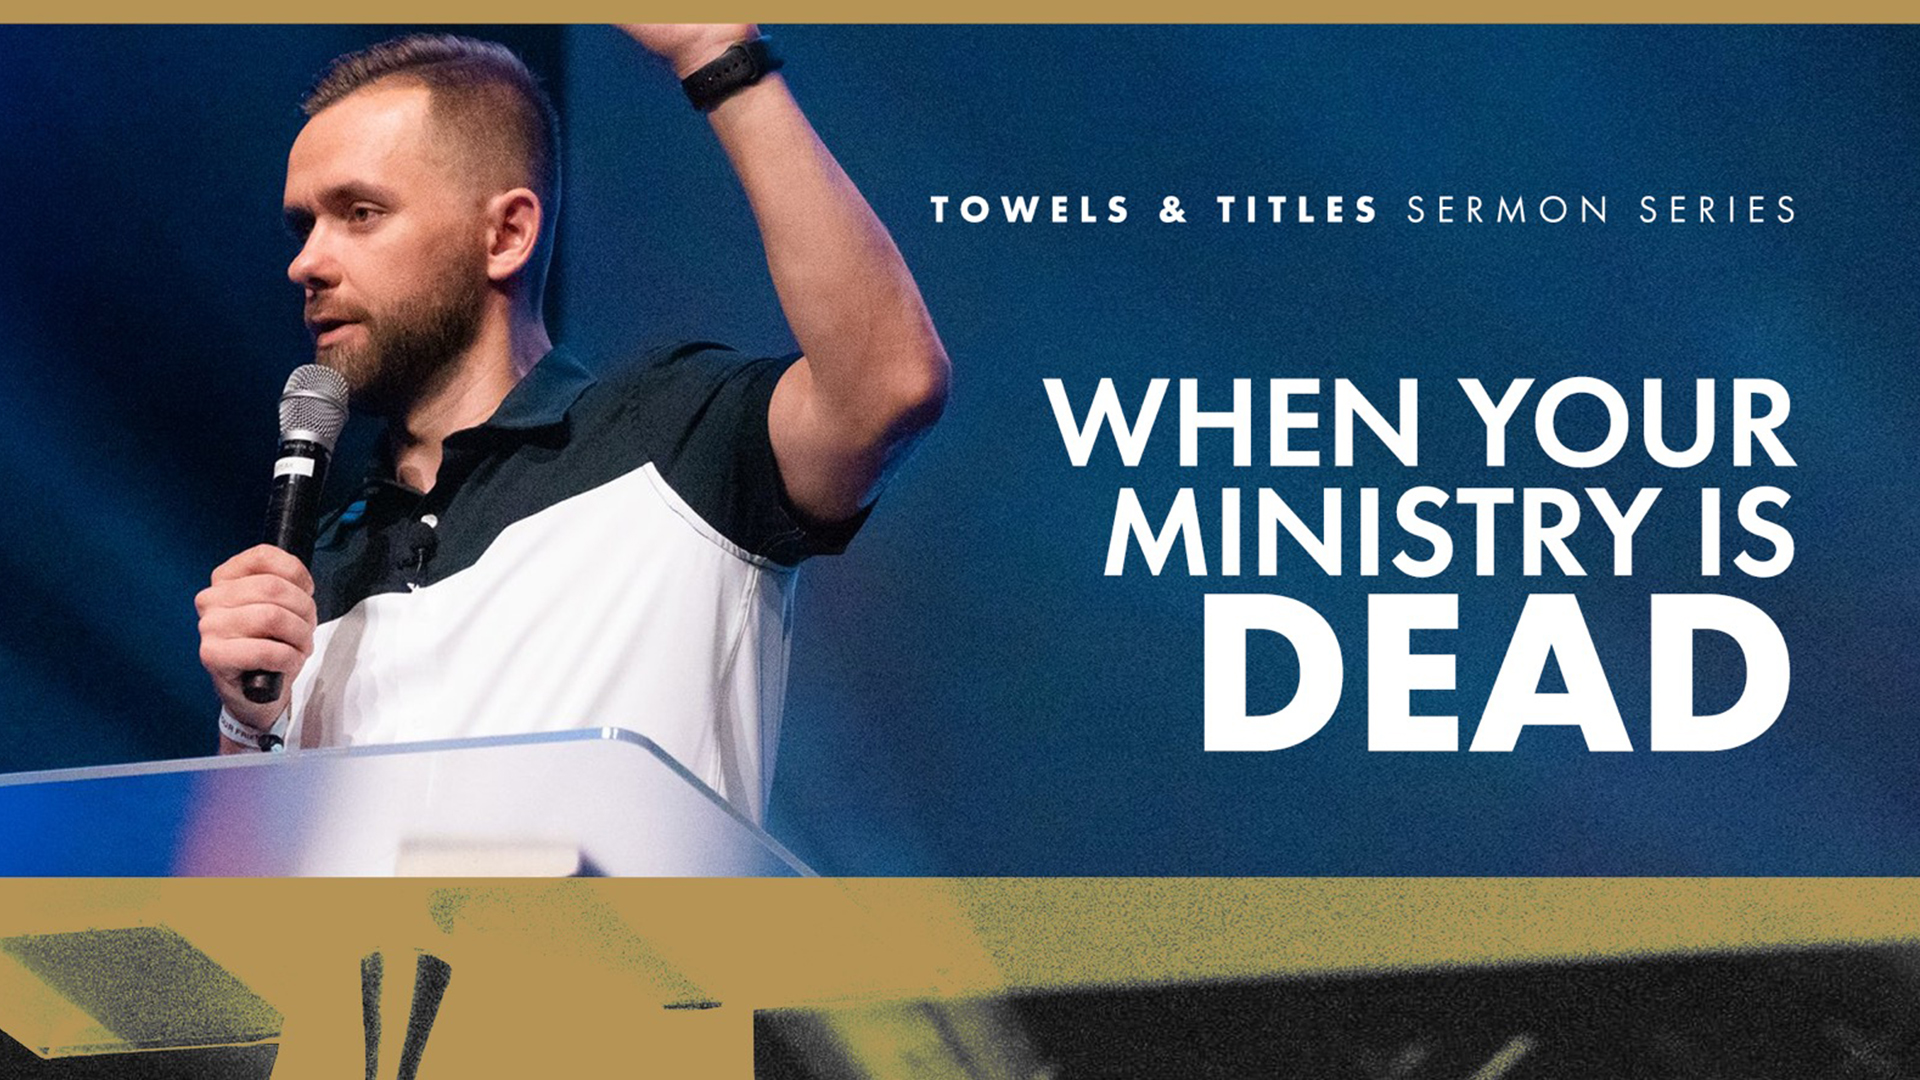 Featured image for “When Your Ministry is Dead”